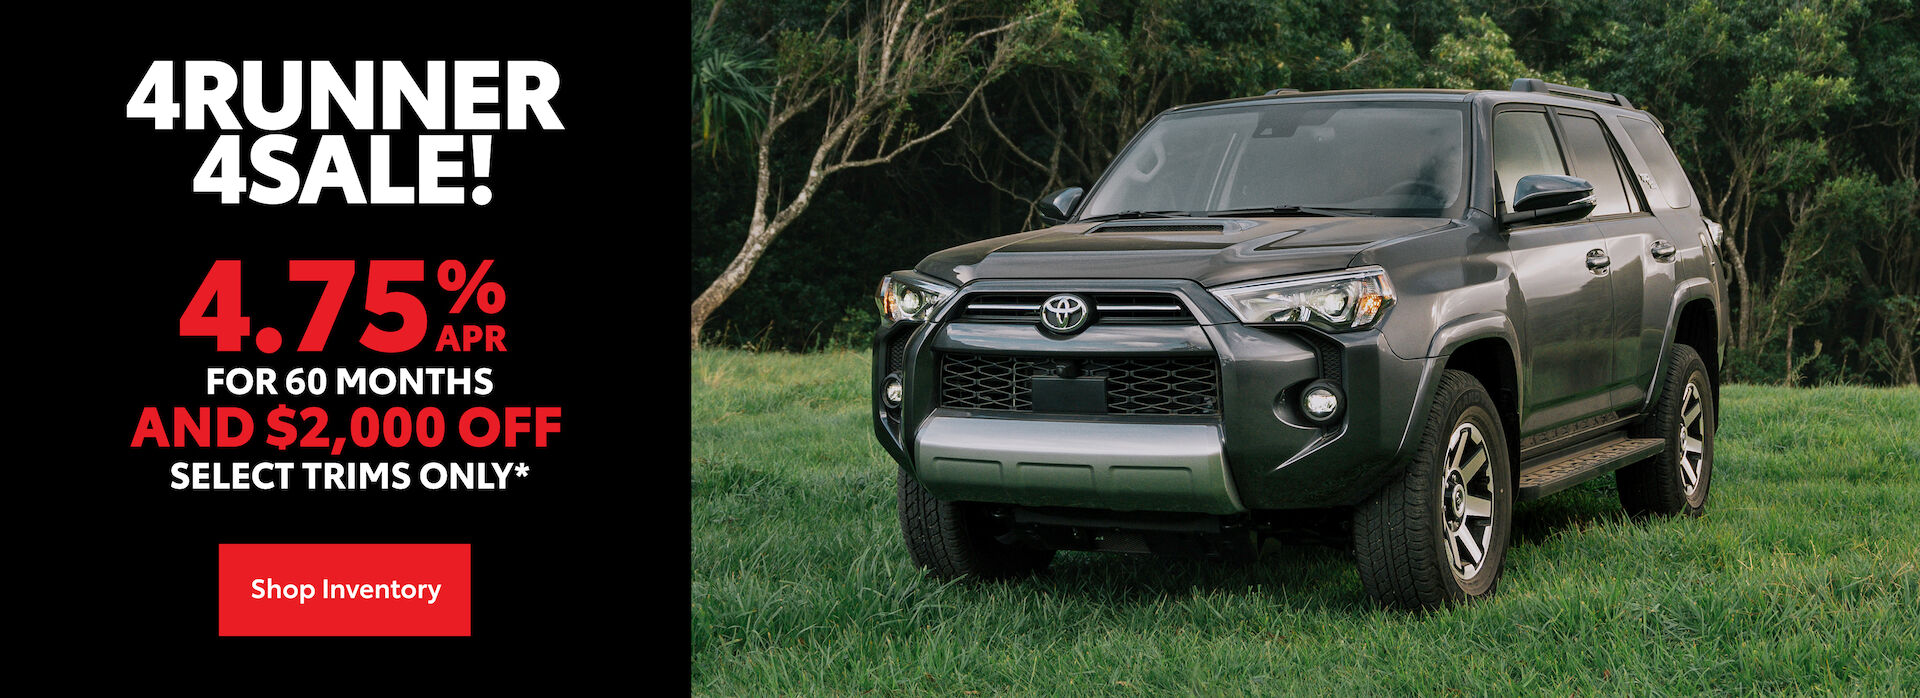 4Runner 4Sale - Get 4.75% APR For 60 Months And $2,000 Off A New 2023 4Runner